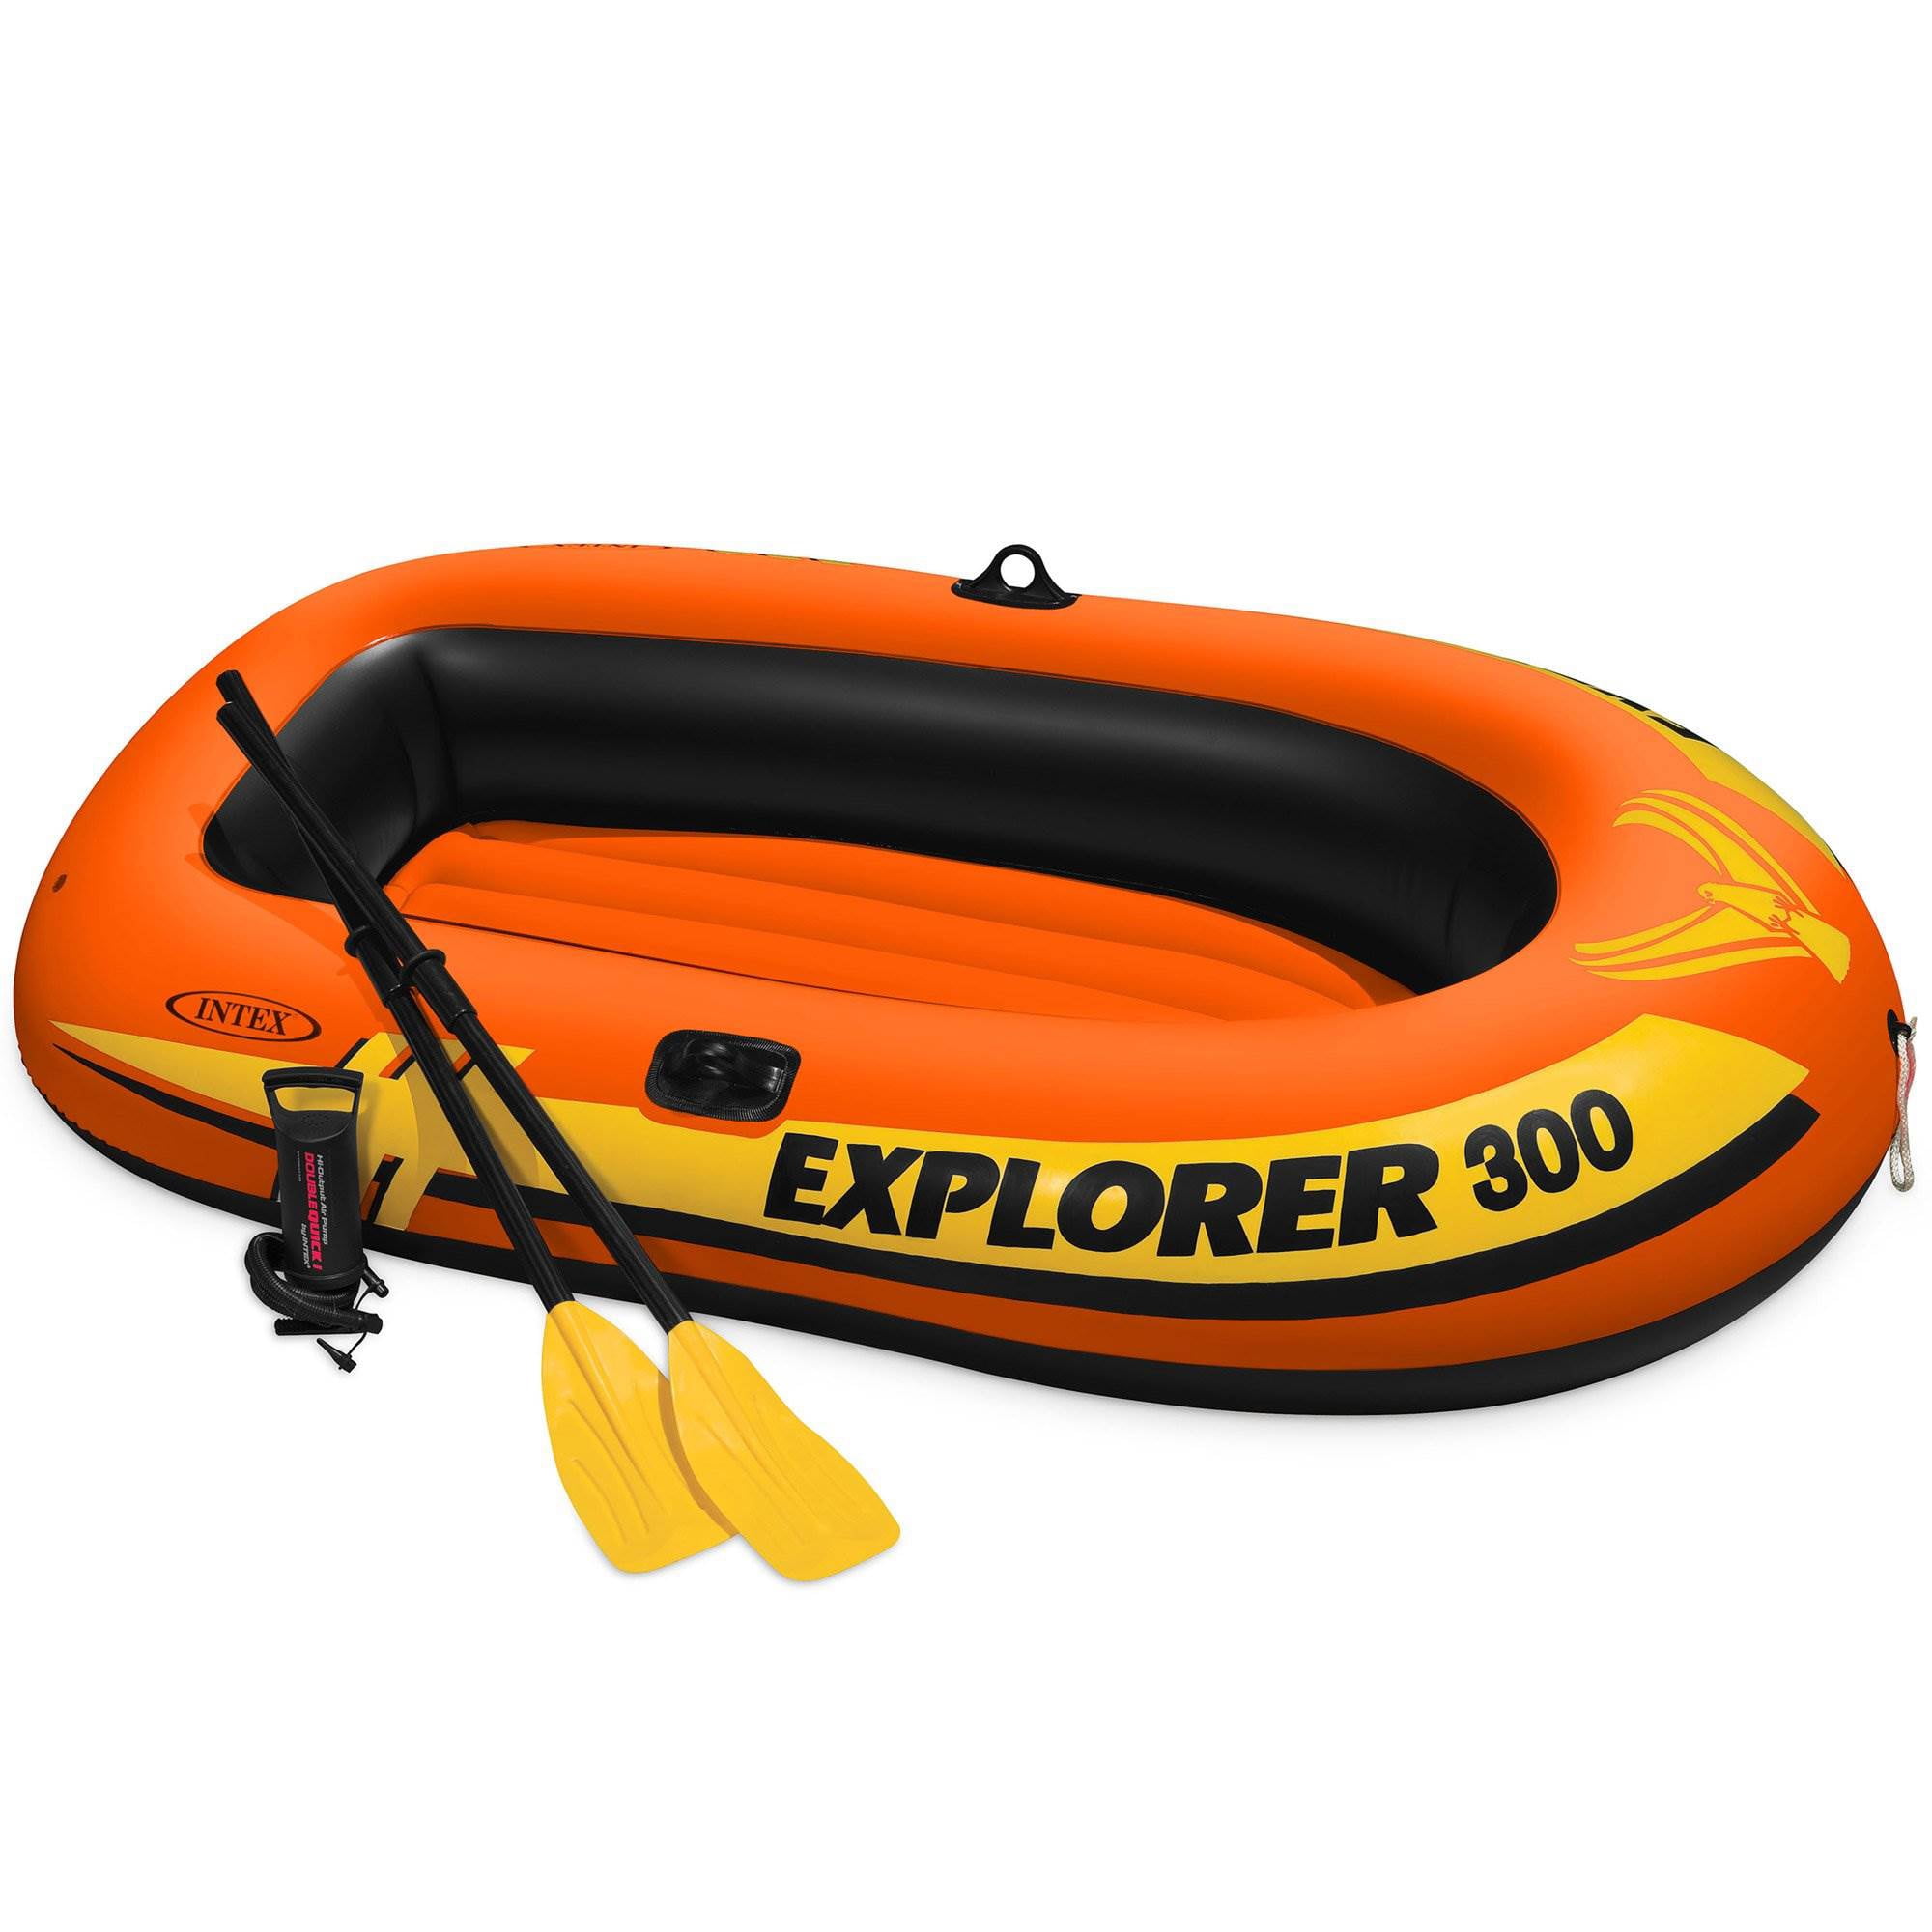 Intex Explorer 300 Compact Inflatable Fishing 3 Person Raft Boat with Pump &  Oars